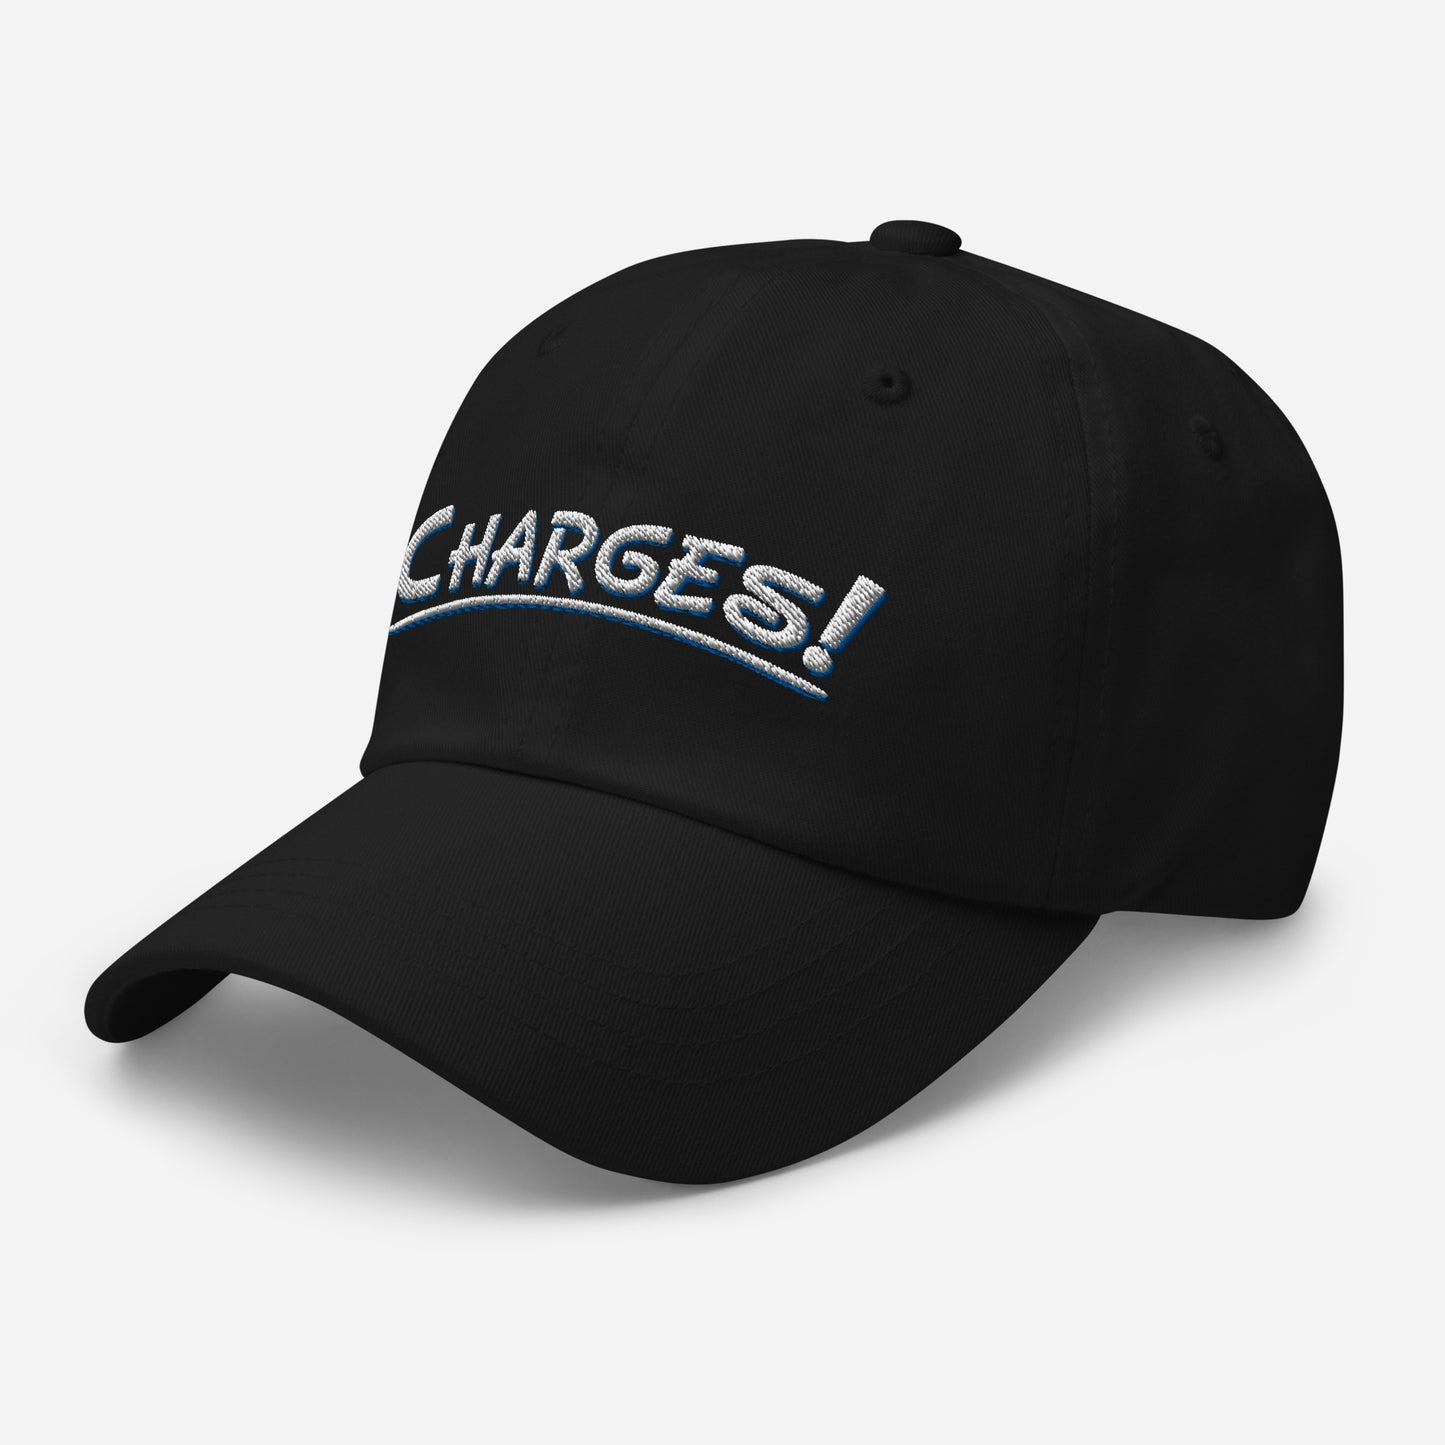 Charges! Adjustable hat